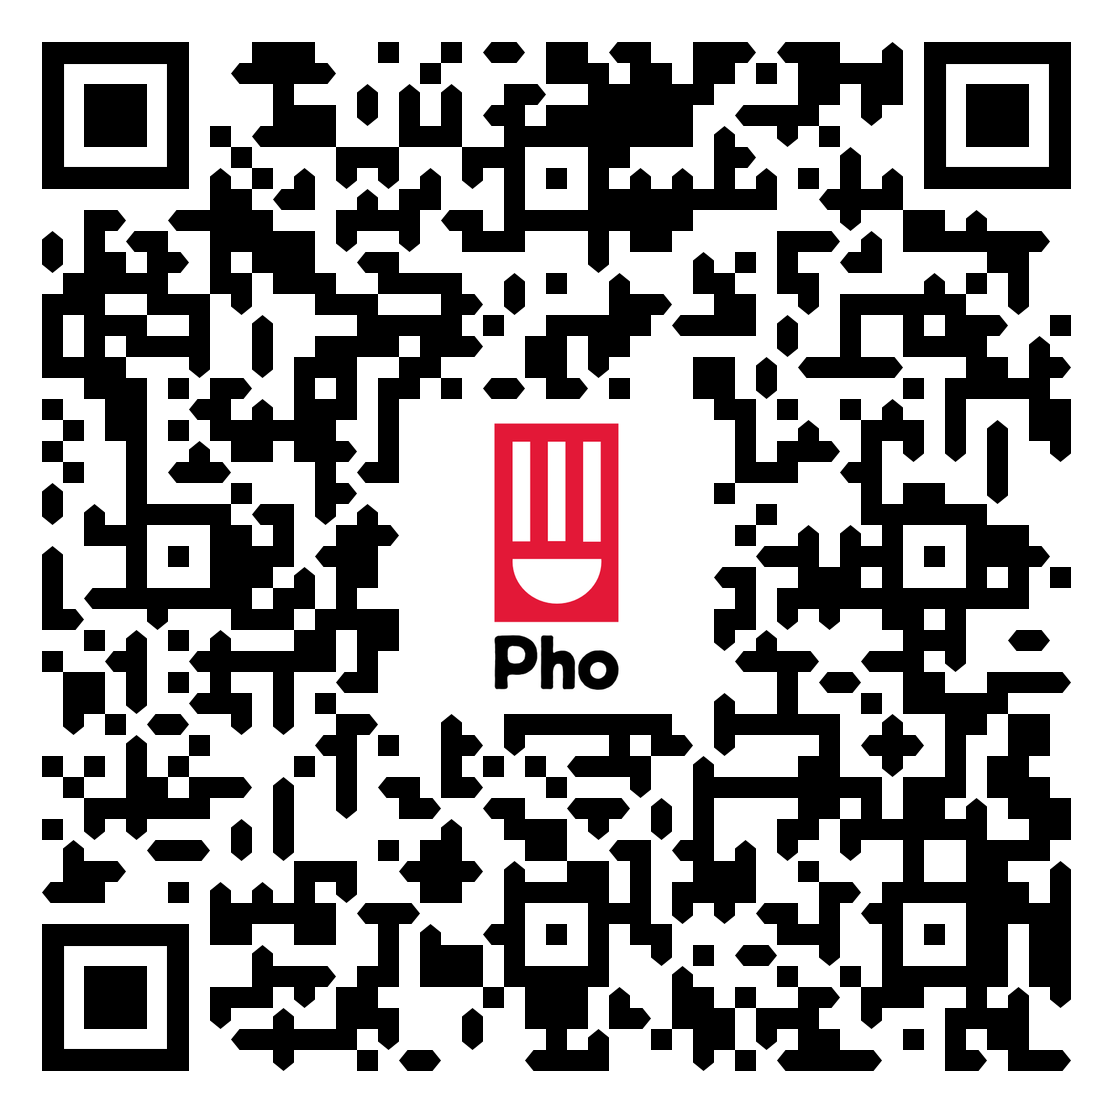 Scan this QR to view our Spotify playlist